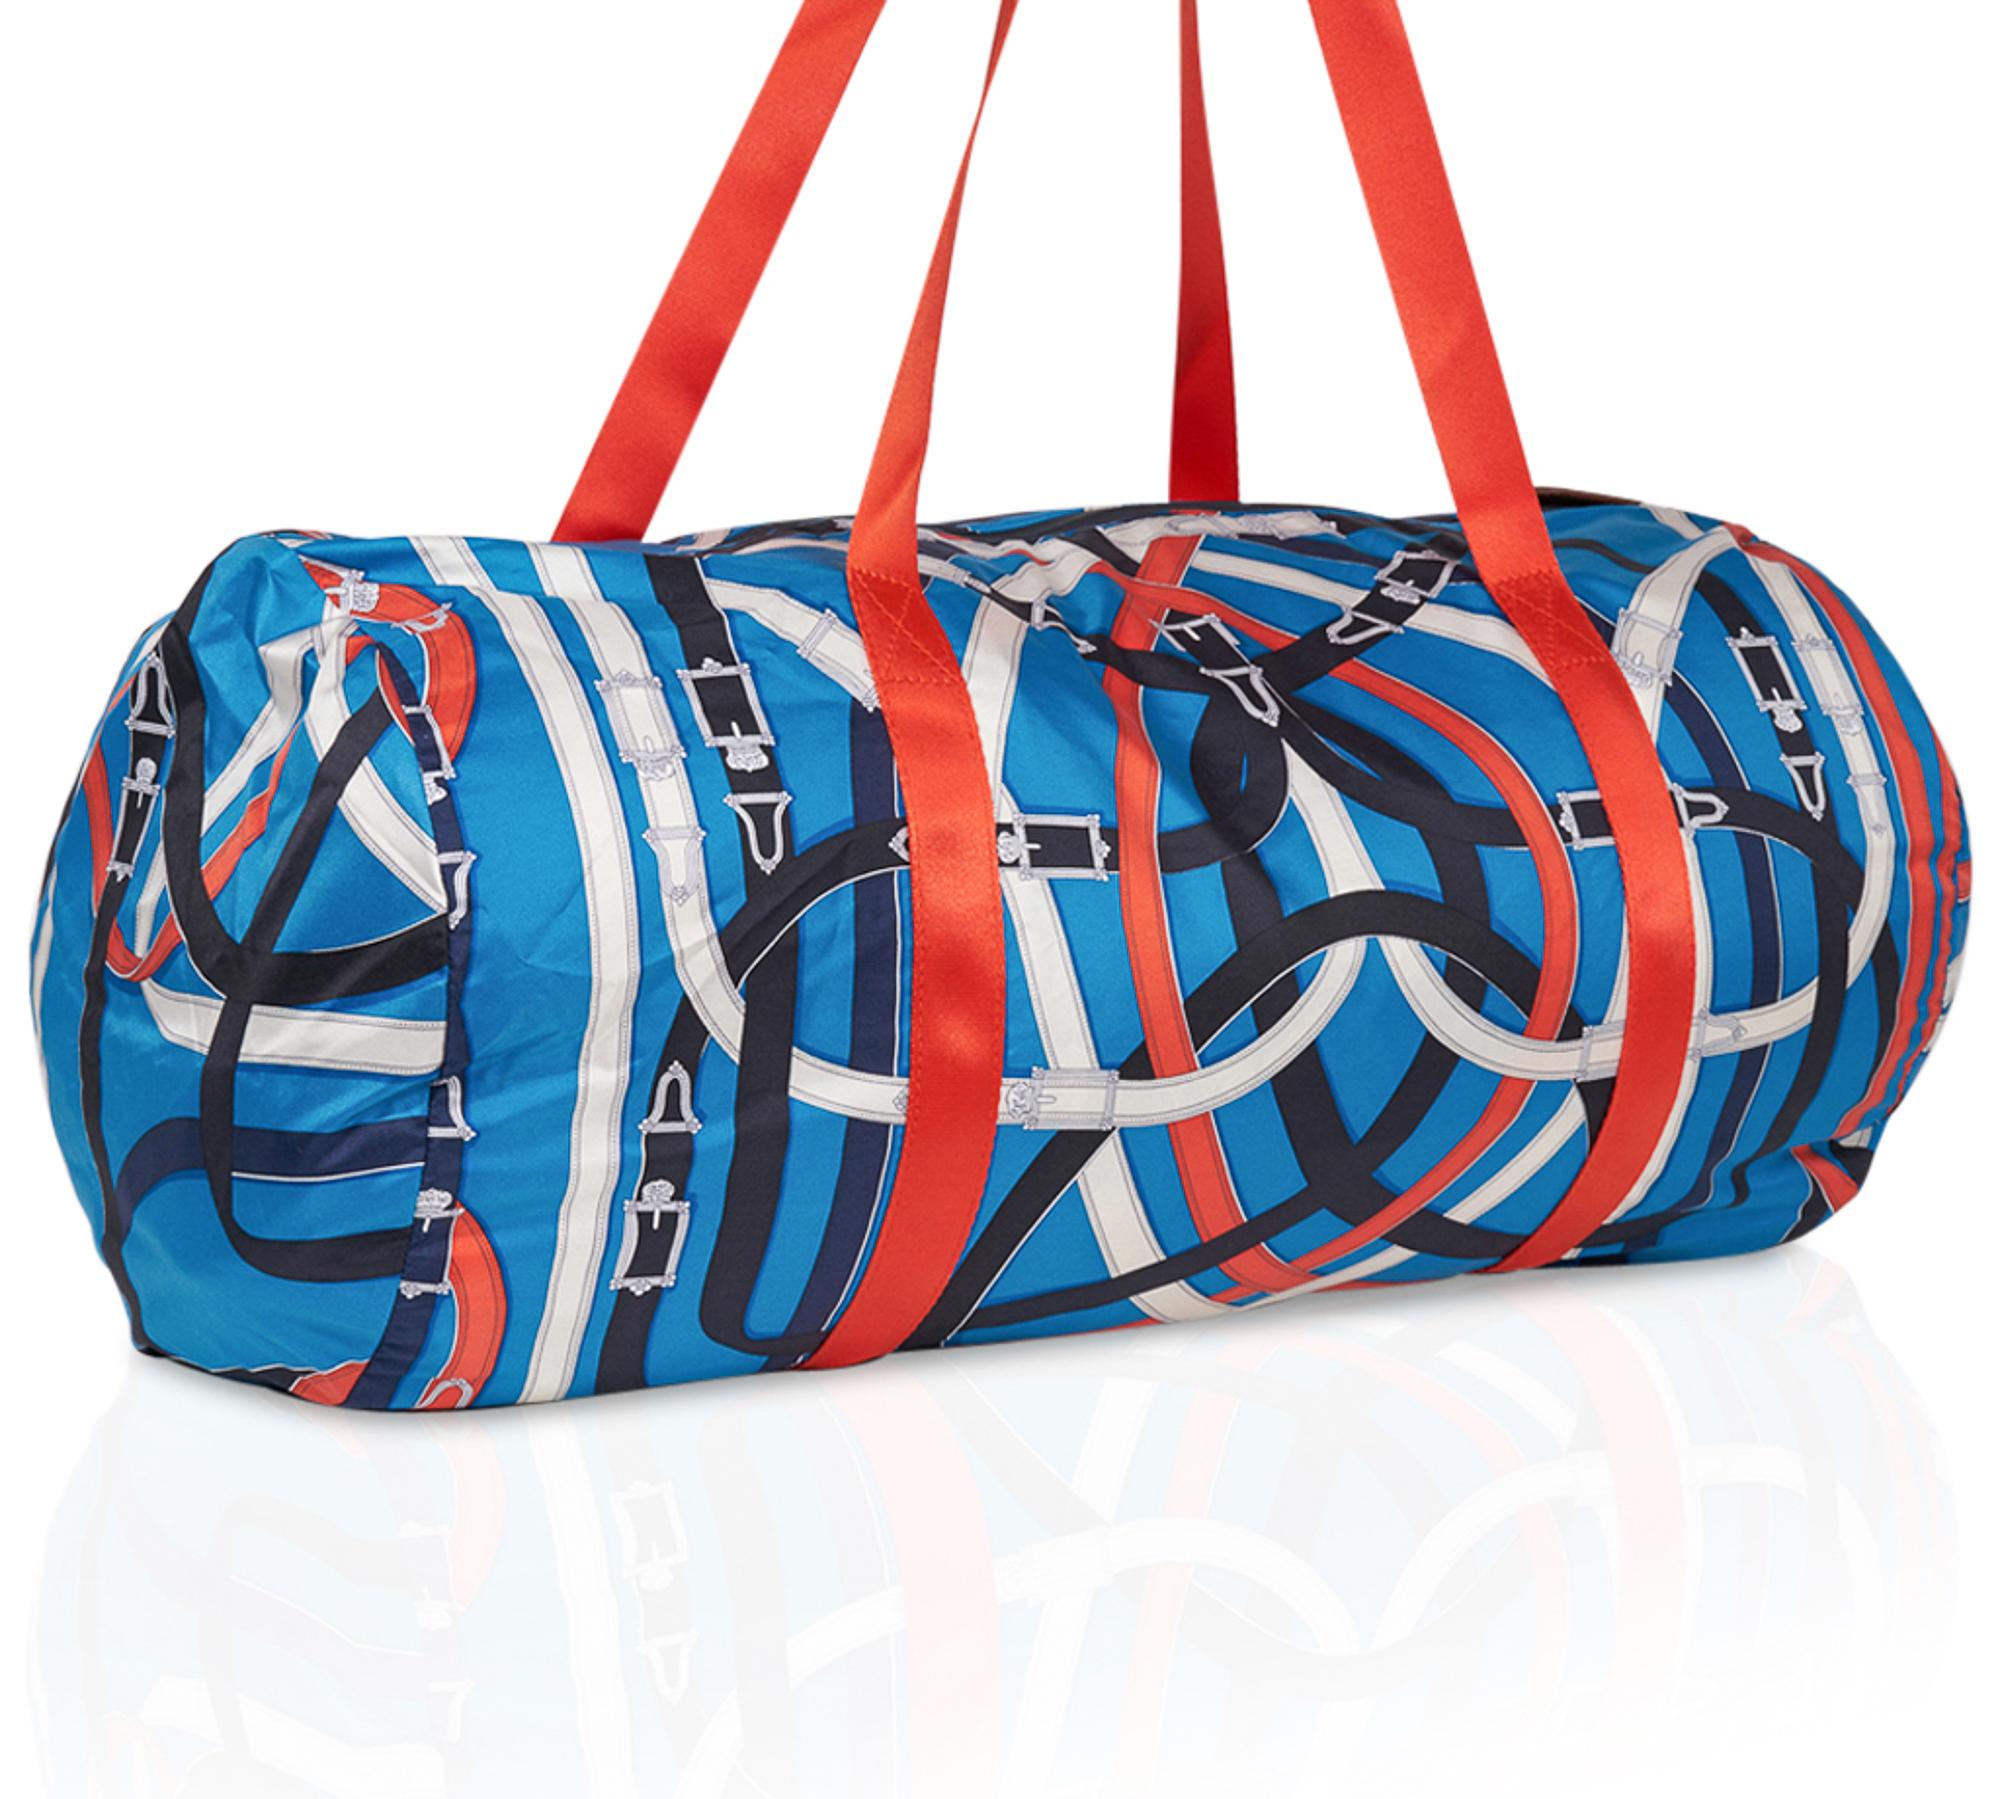 Mightychic offers a limited edition Hermes Airsilk Duffle Cavalcadour 50 featured in Blue, Orange, White and Black.
Beautiful Cavalcadour silk scarf print designed by Henri d'Origny.
The perfect elegant top zip weekend / gym bag. 
Palladium plated